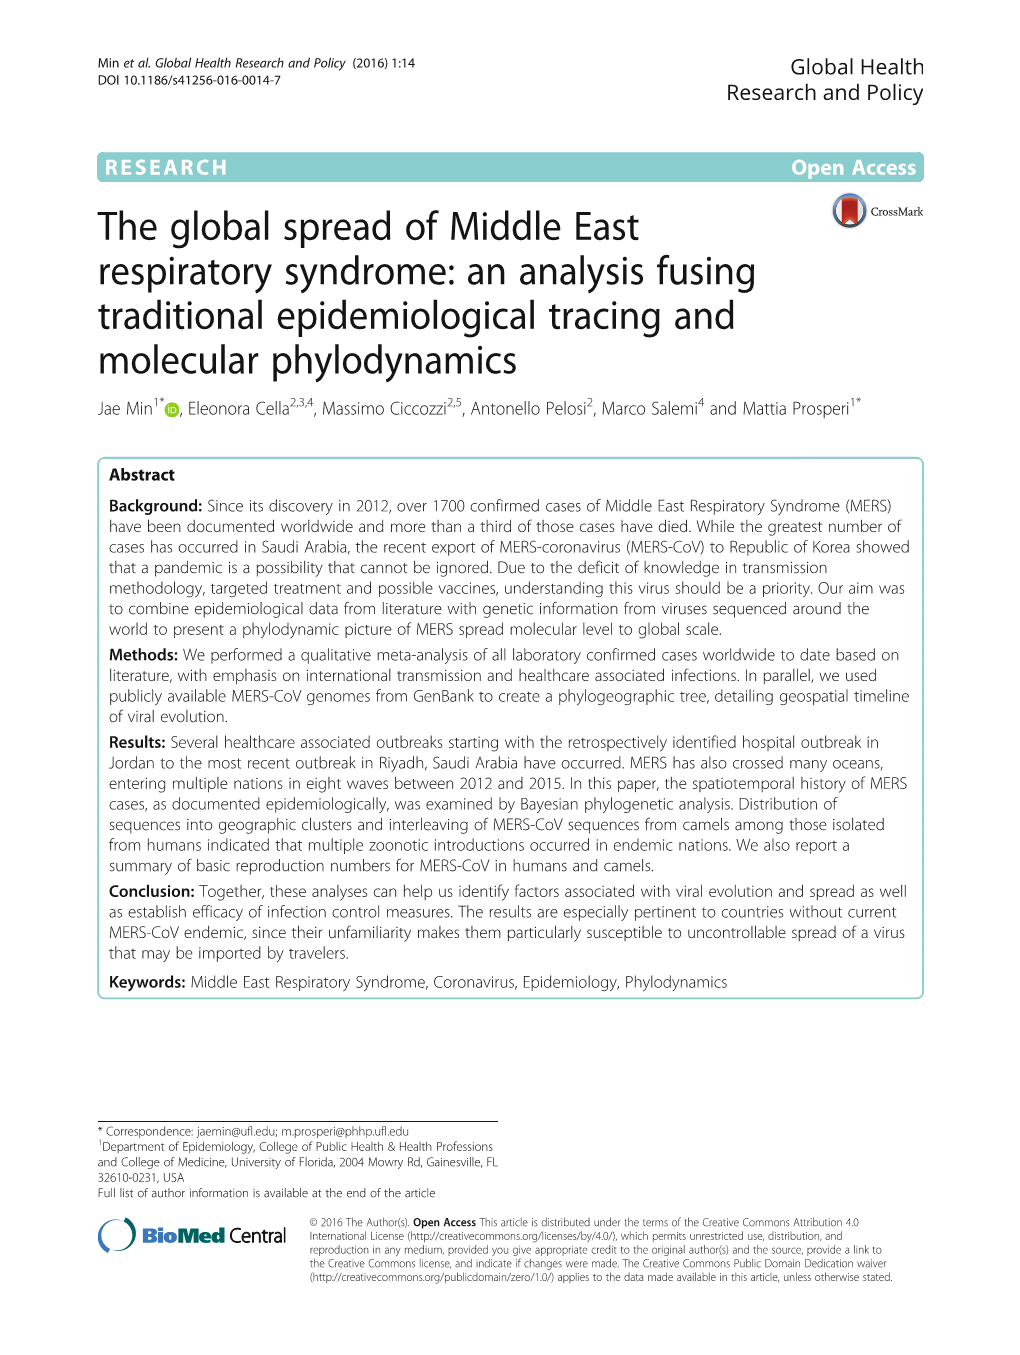 The Global Spread of Middle East Respiratory Syndrome